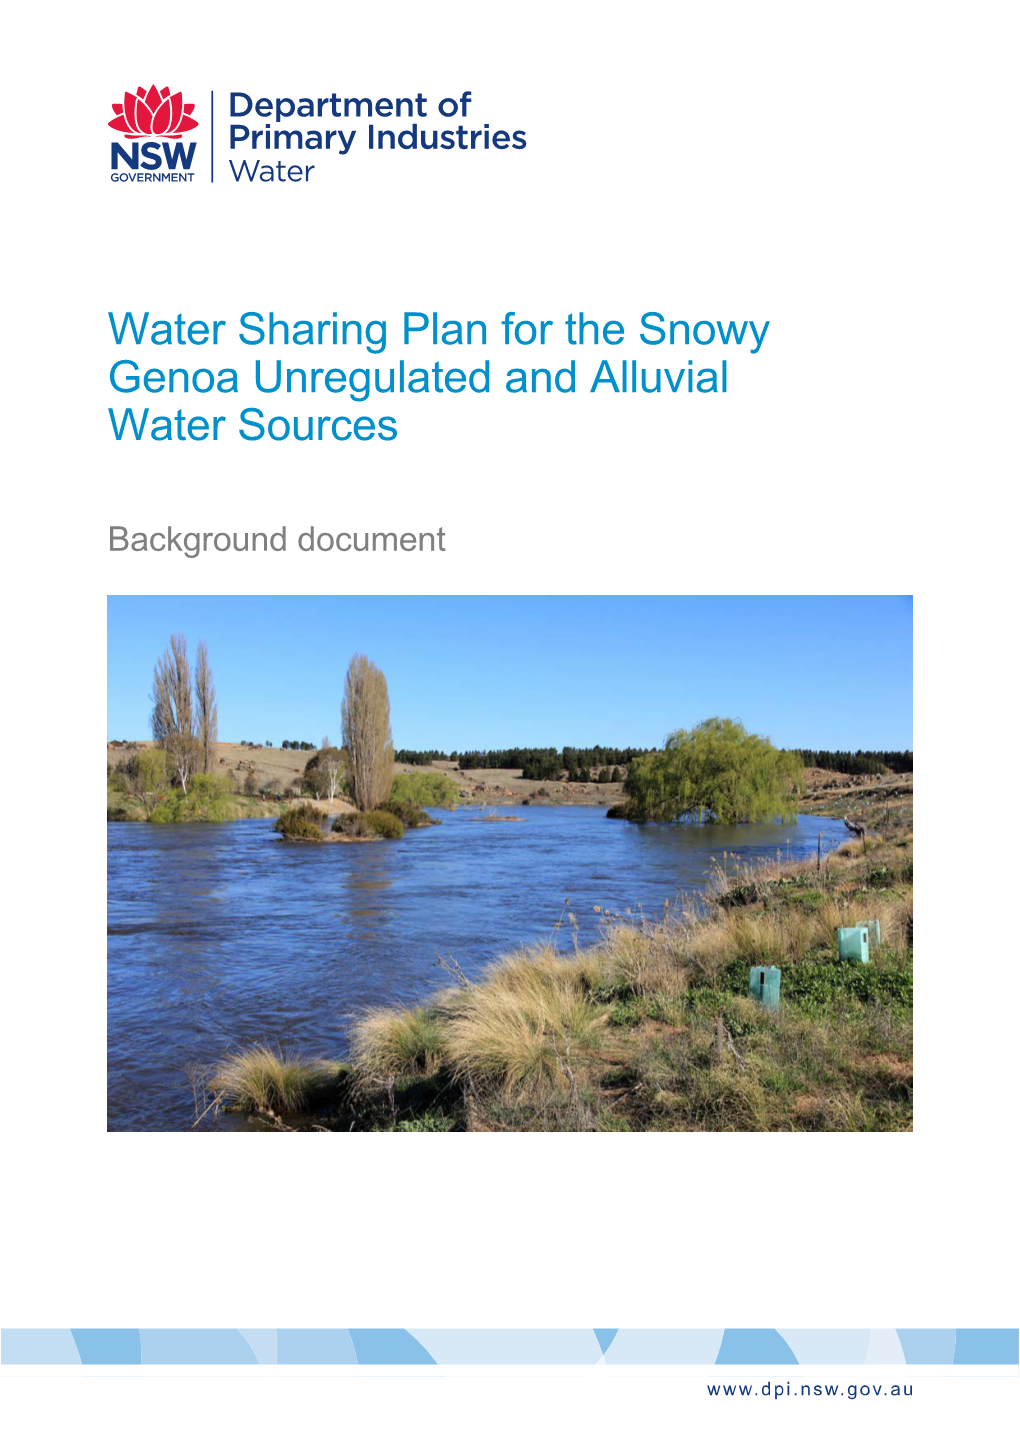 Water Sharing Plan for the Snowy Genoa Unregulated and Alluvial Water Sources